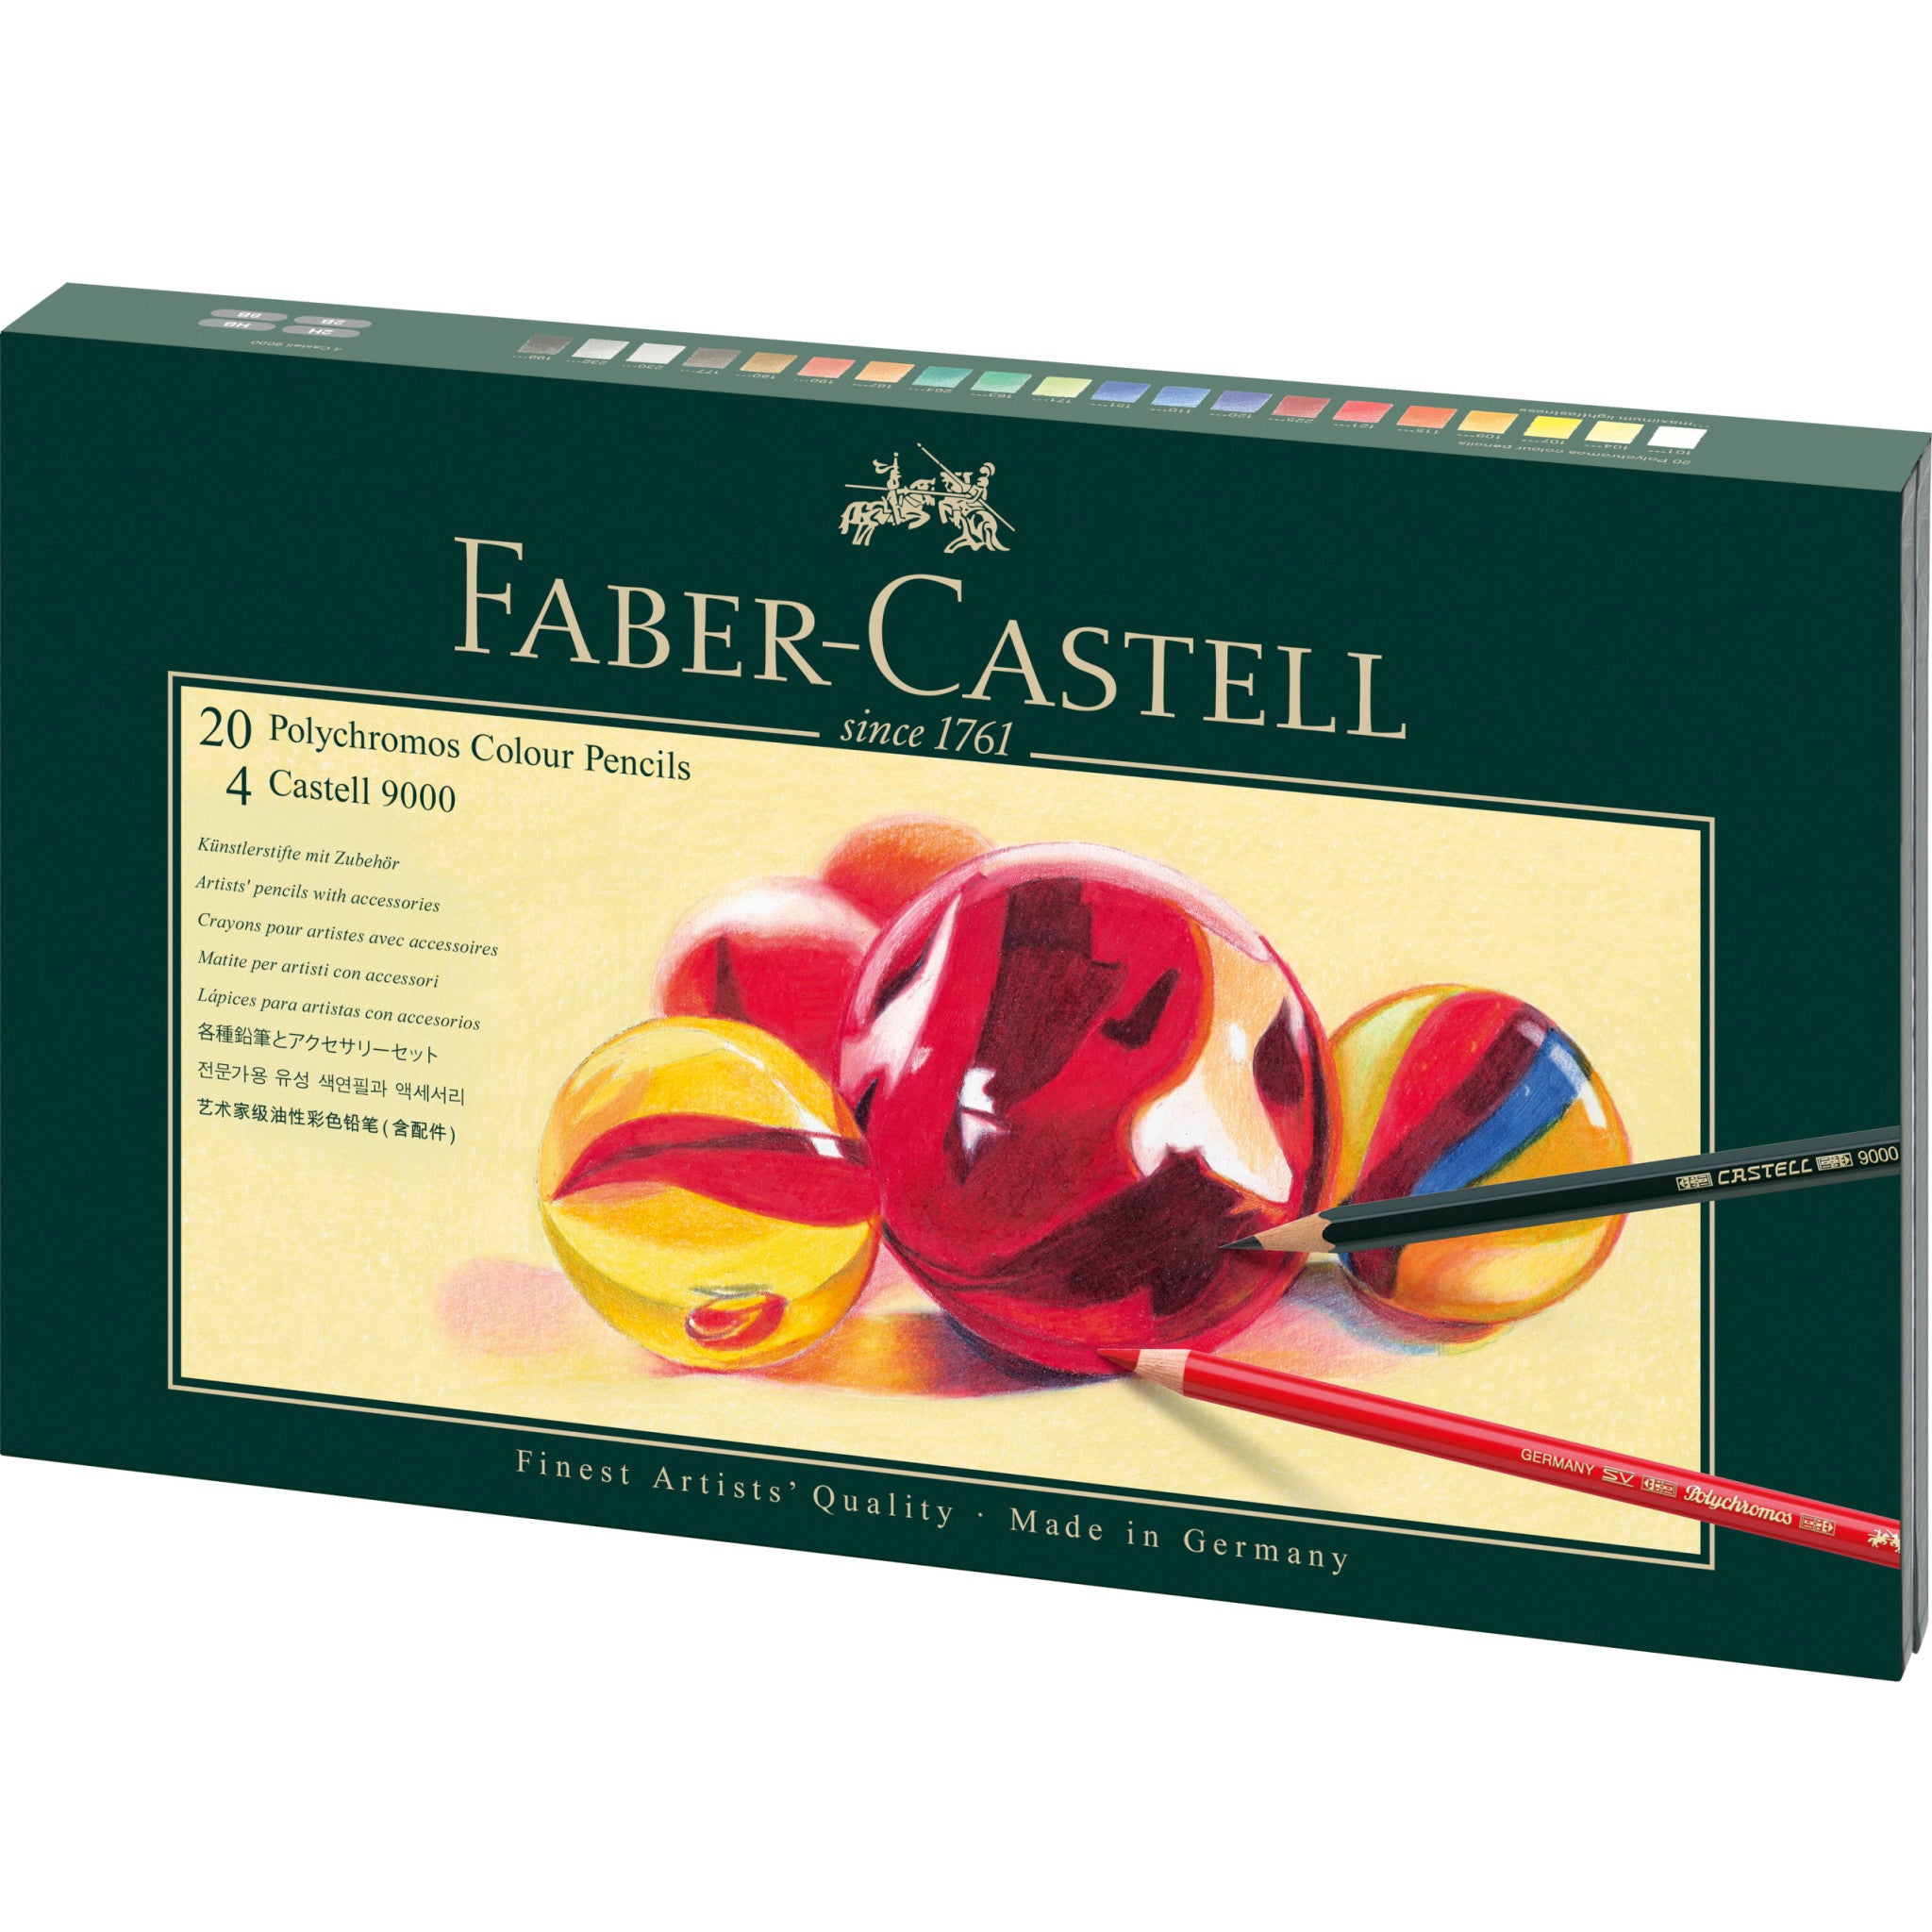 Polychromos Colored Pencil Sets by Faber-Castell truly live up to their  name. Polychromos meaning…